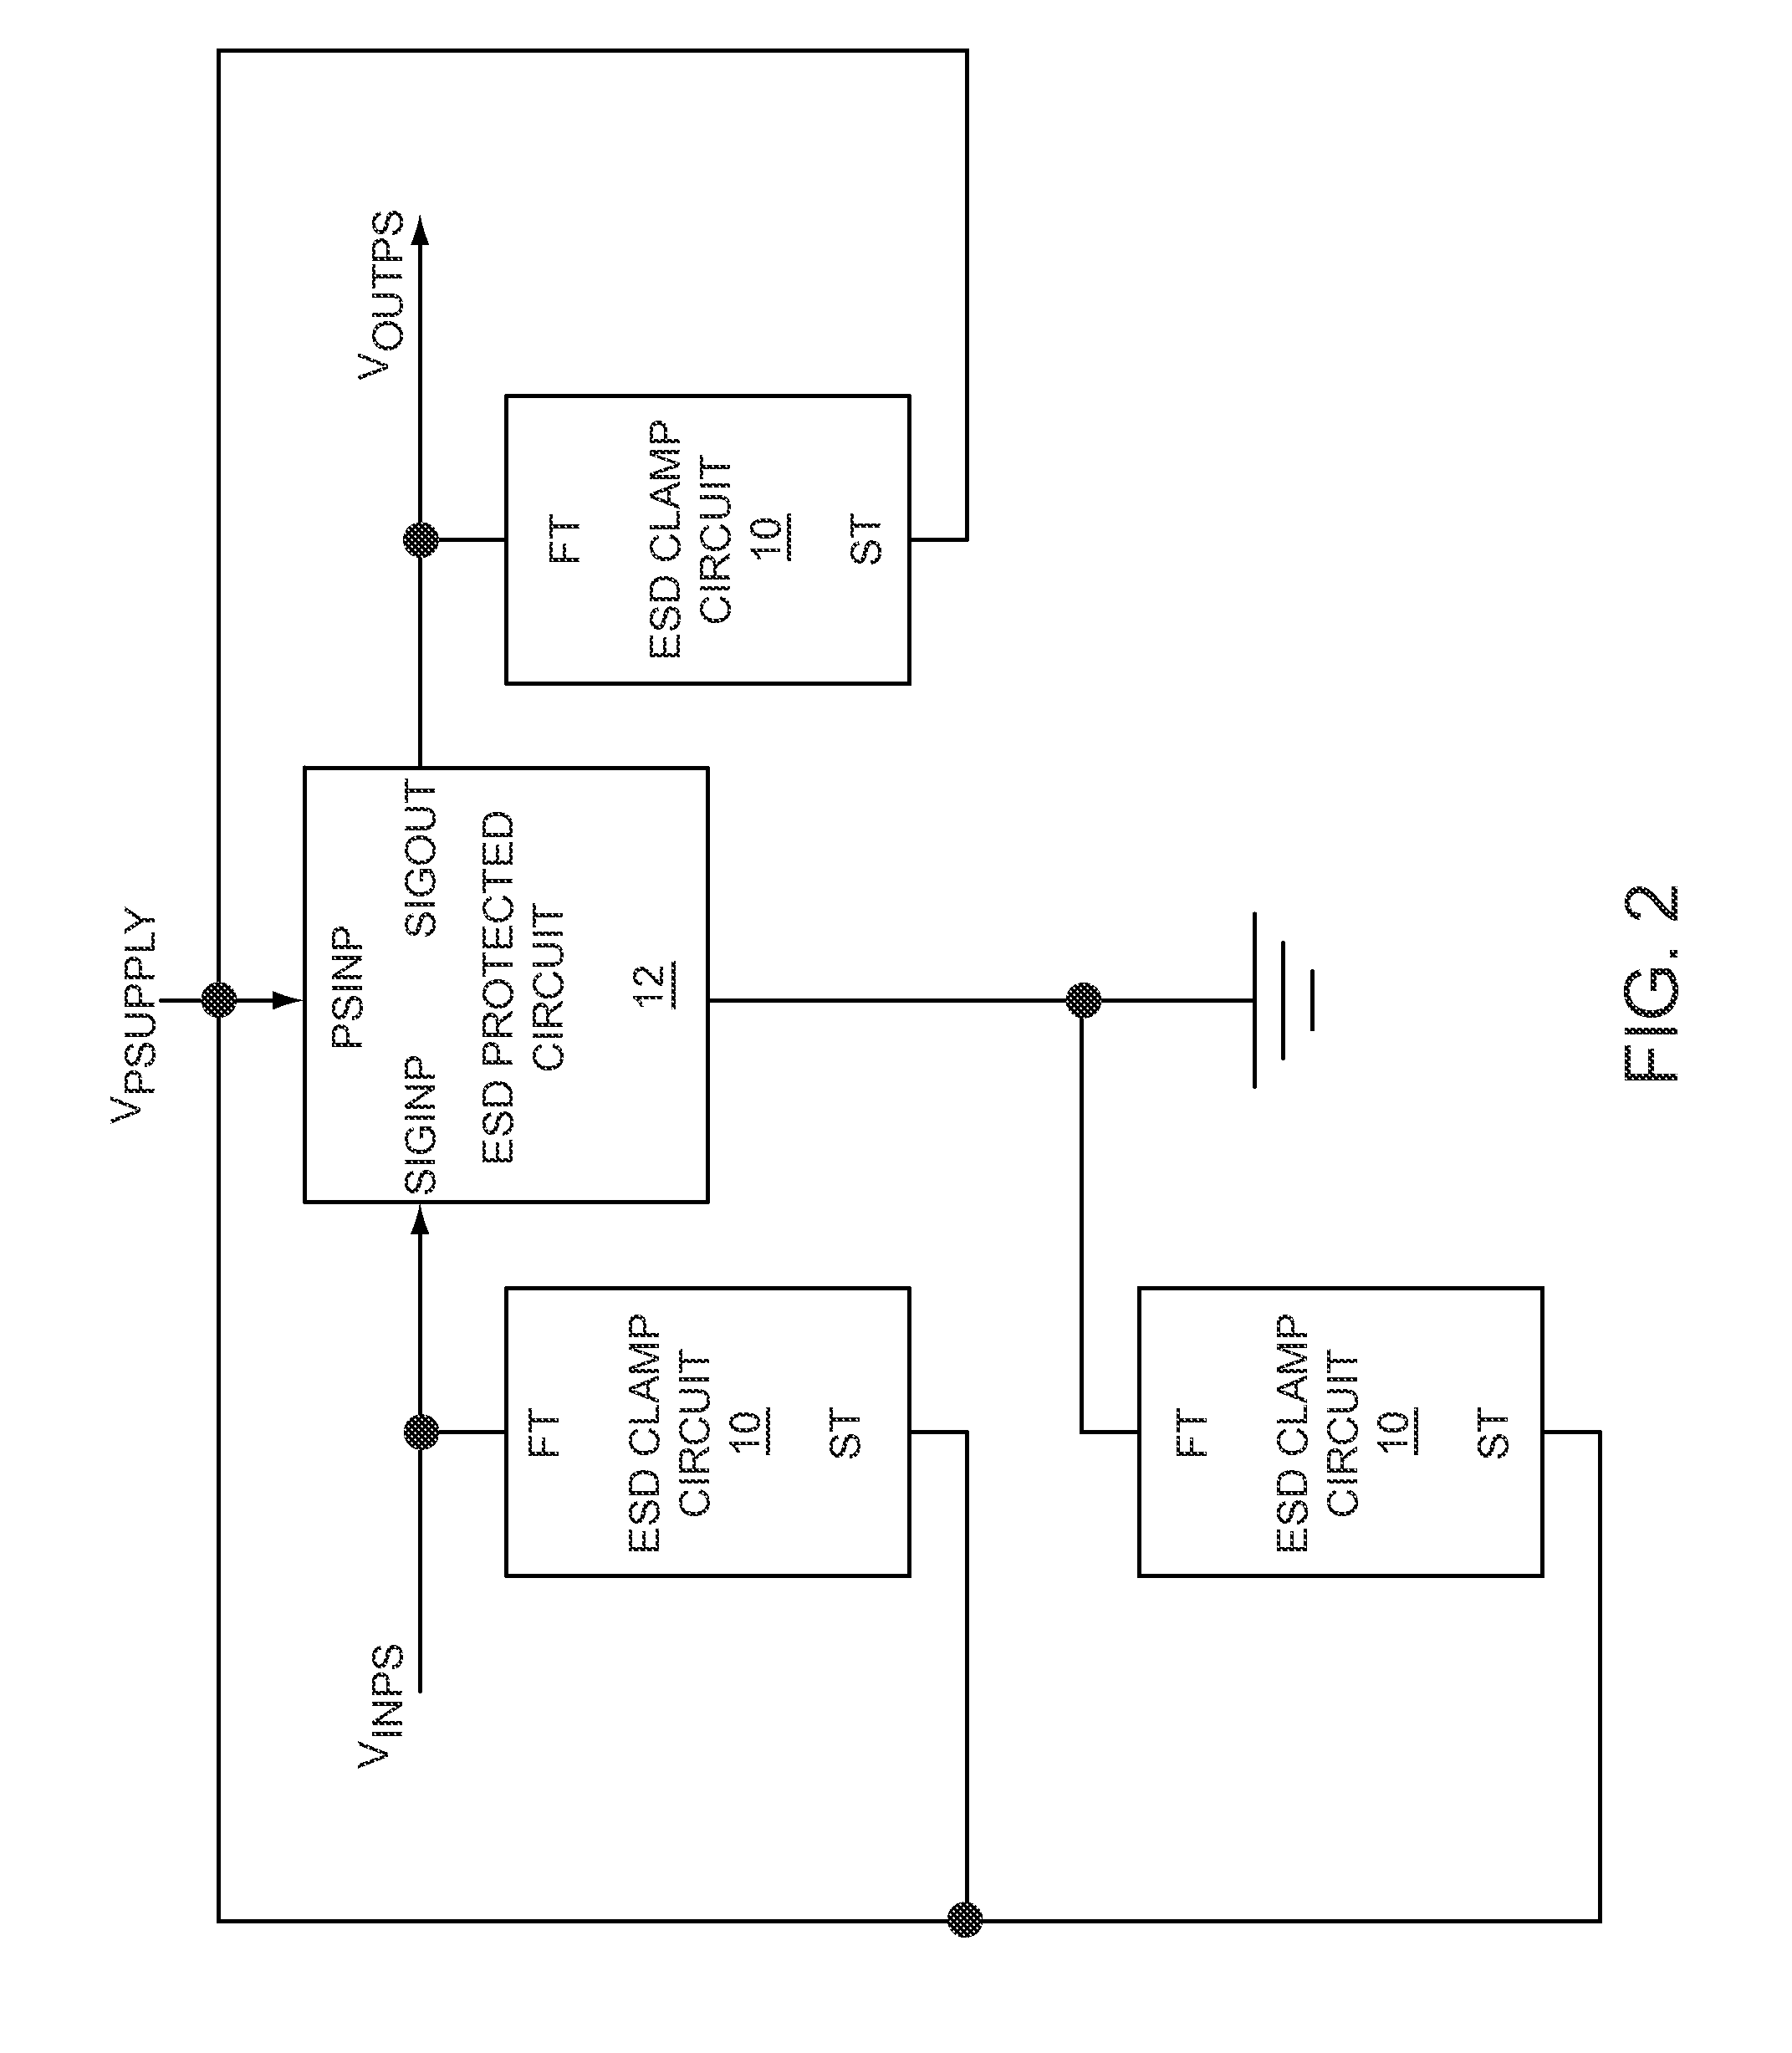 Enhancement-mode field effect transistor based electrostatic discharge protection circuit